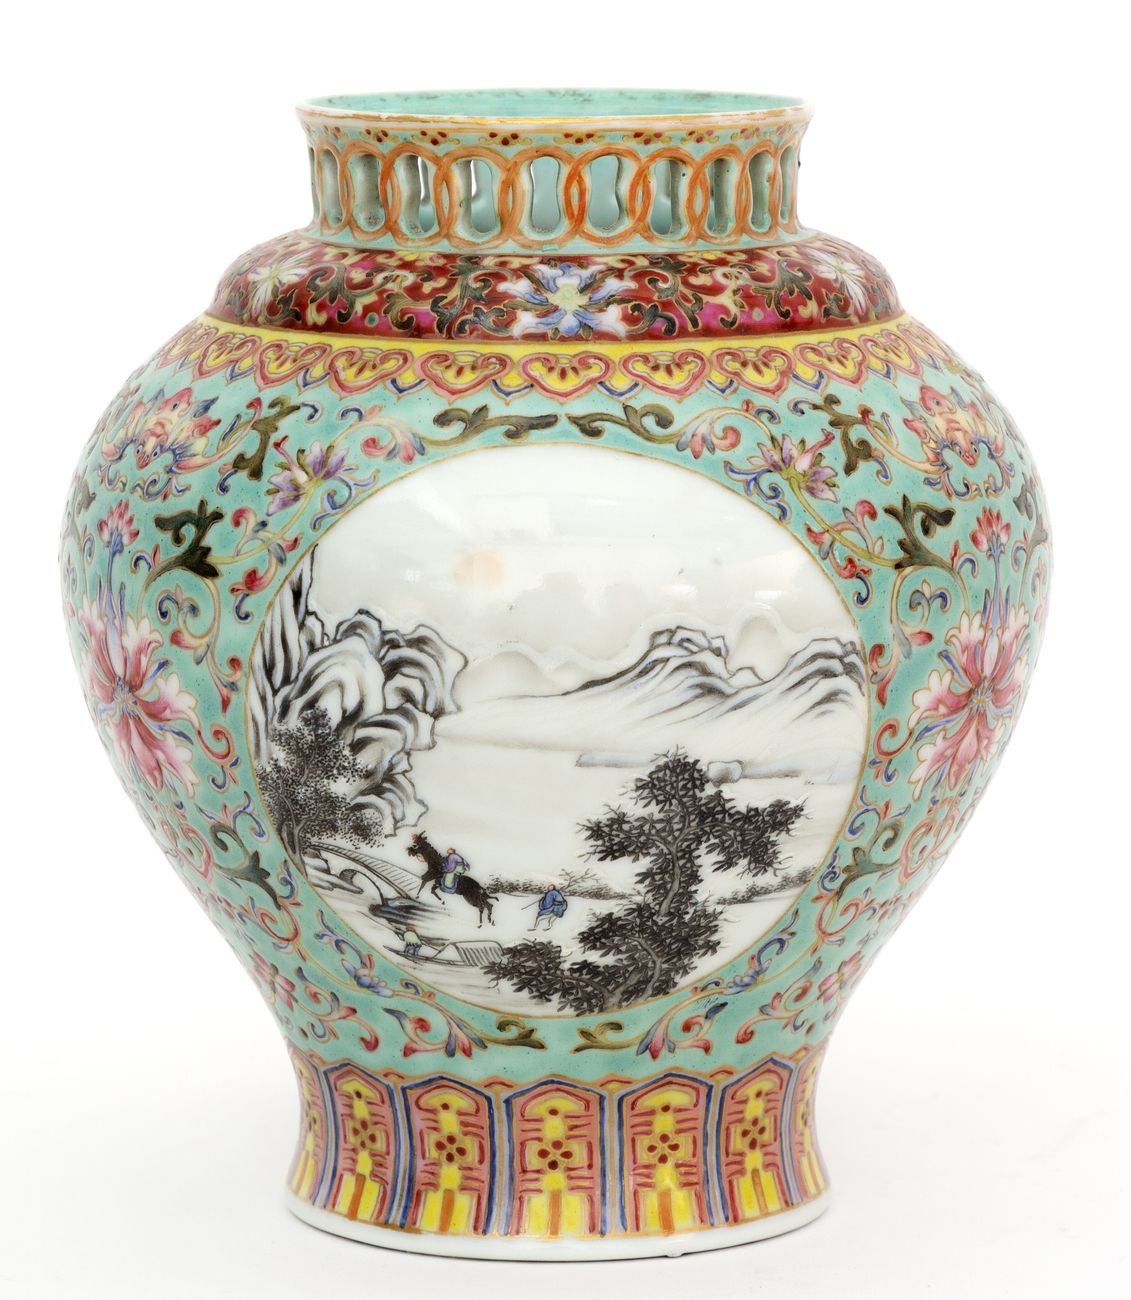 Null China, Republic period (1912-1949)
Porcelain pansu vase decorated in Famill&hellip;